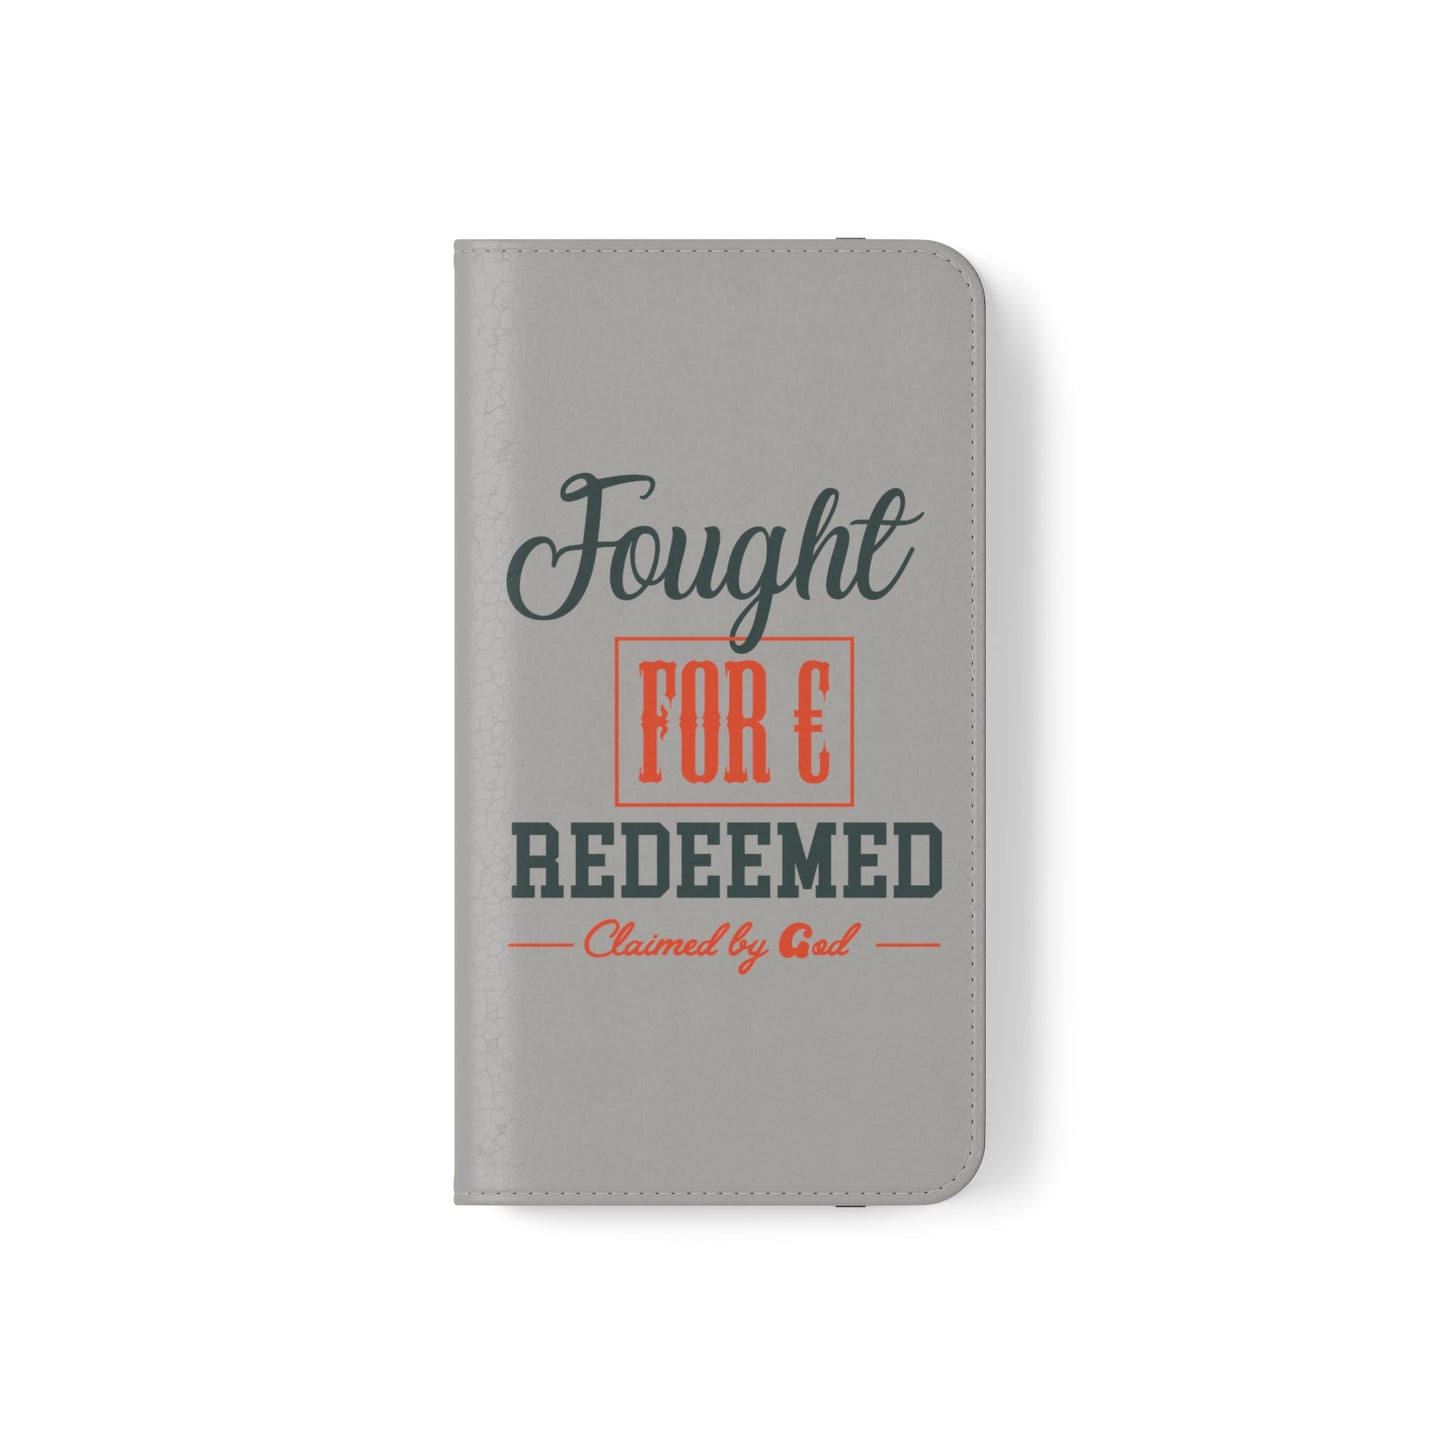 Fought For & Redeemed Phone Flip Cases